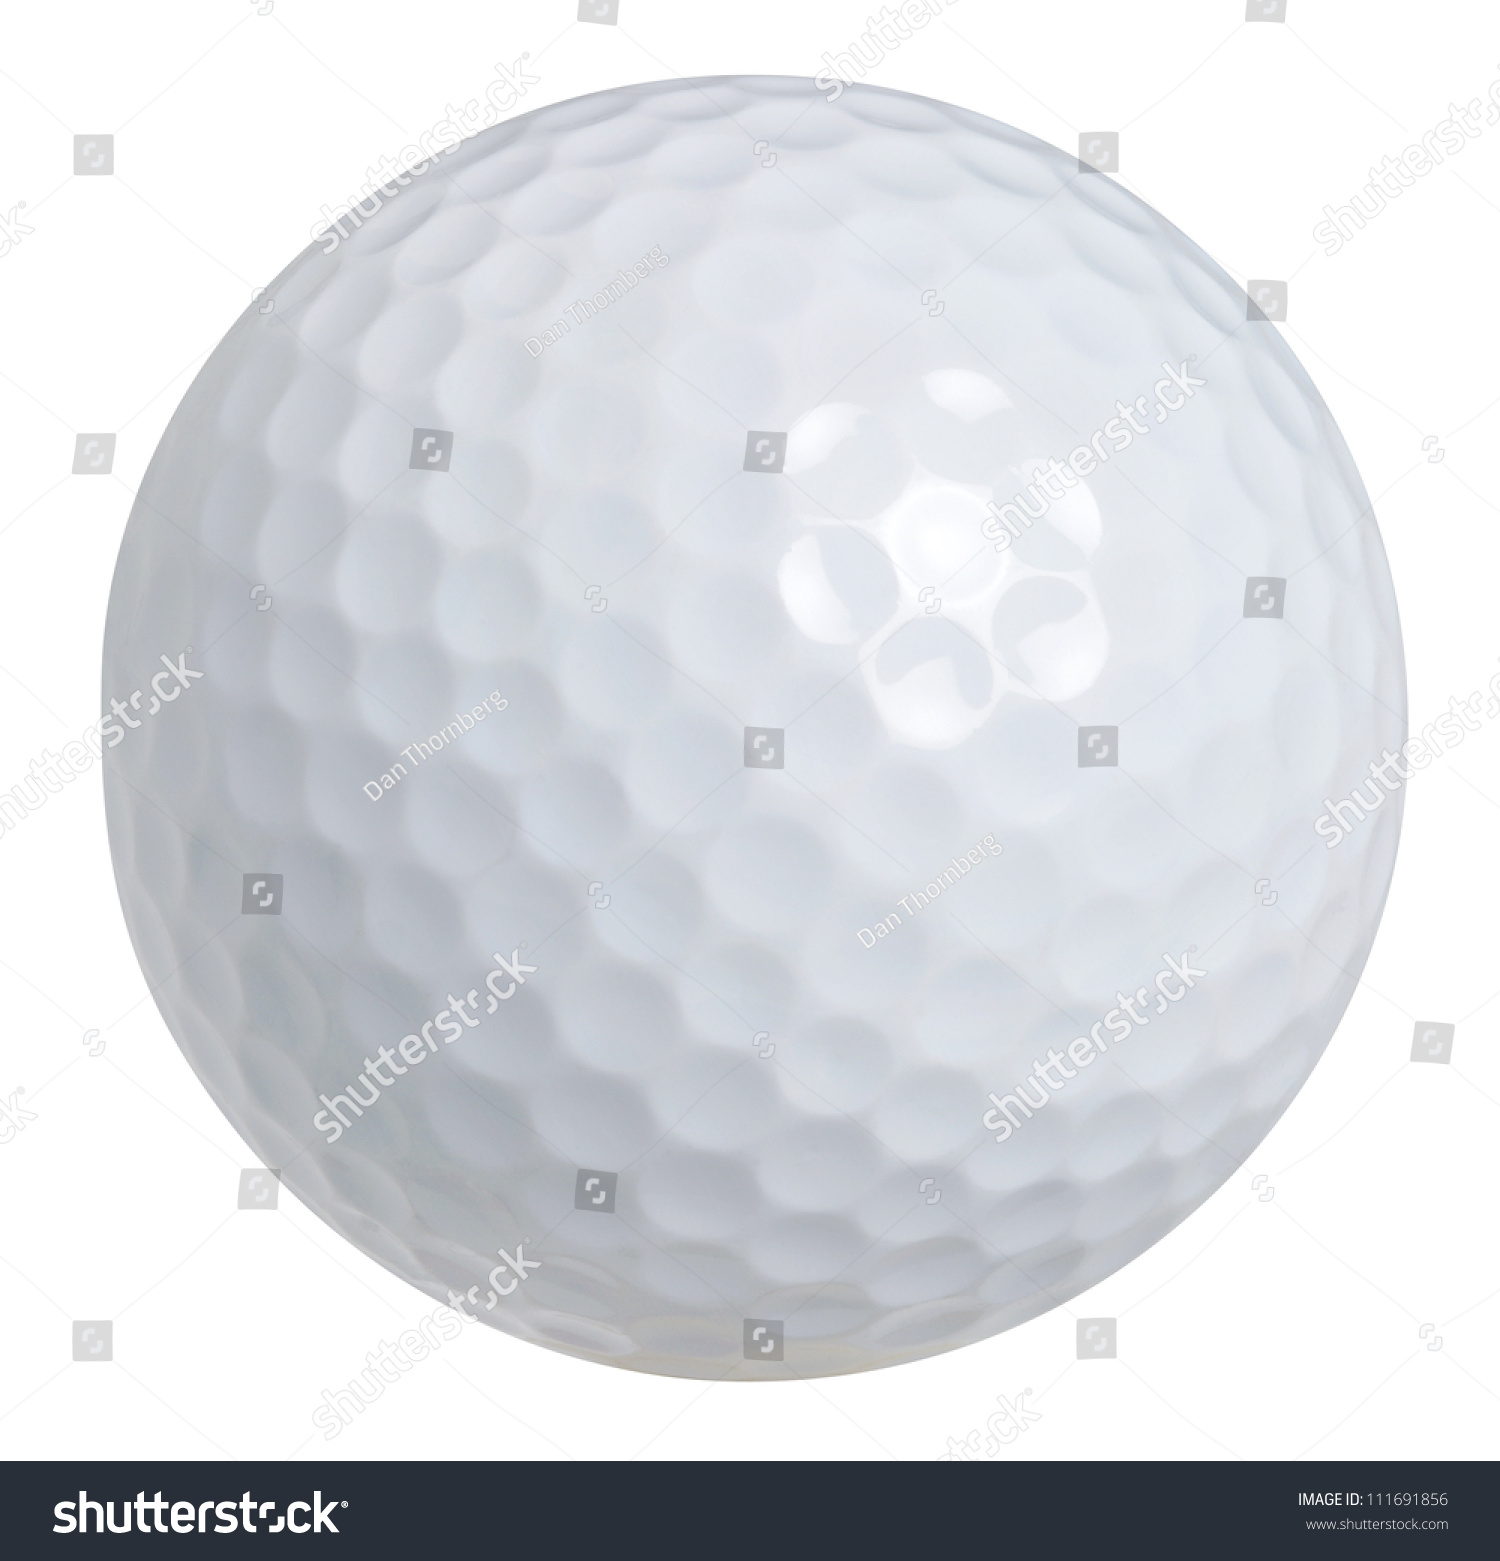 Golf ball isolated on white with clipping path #111691856